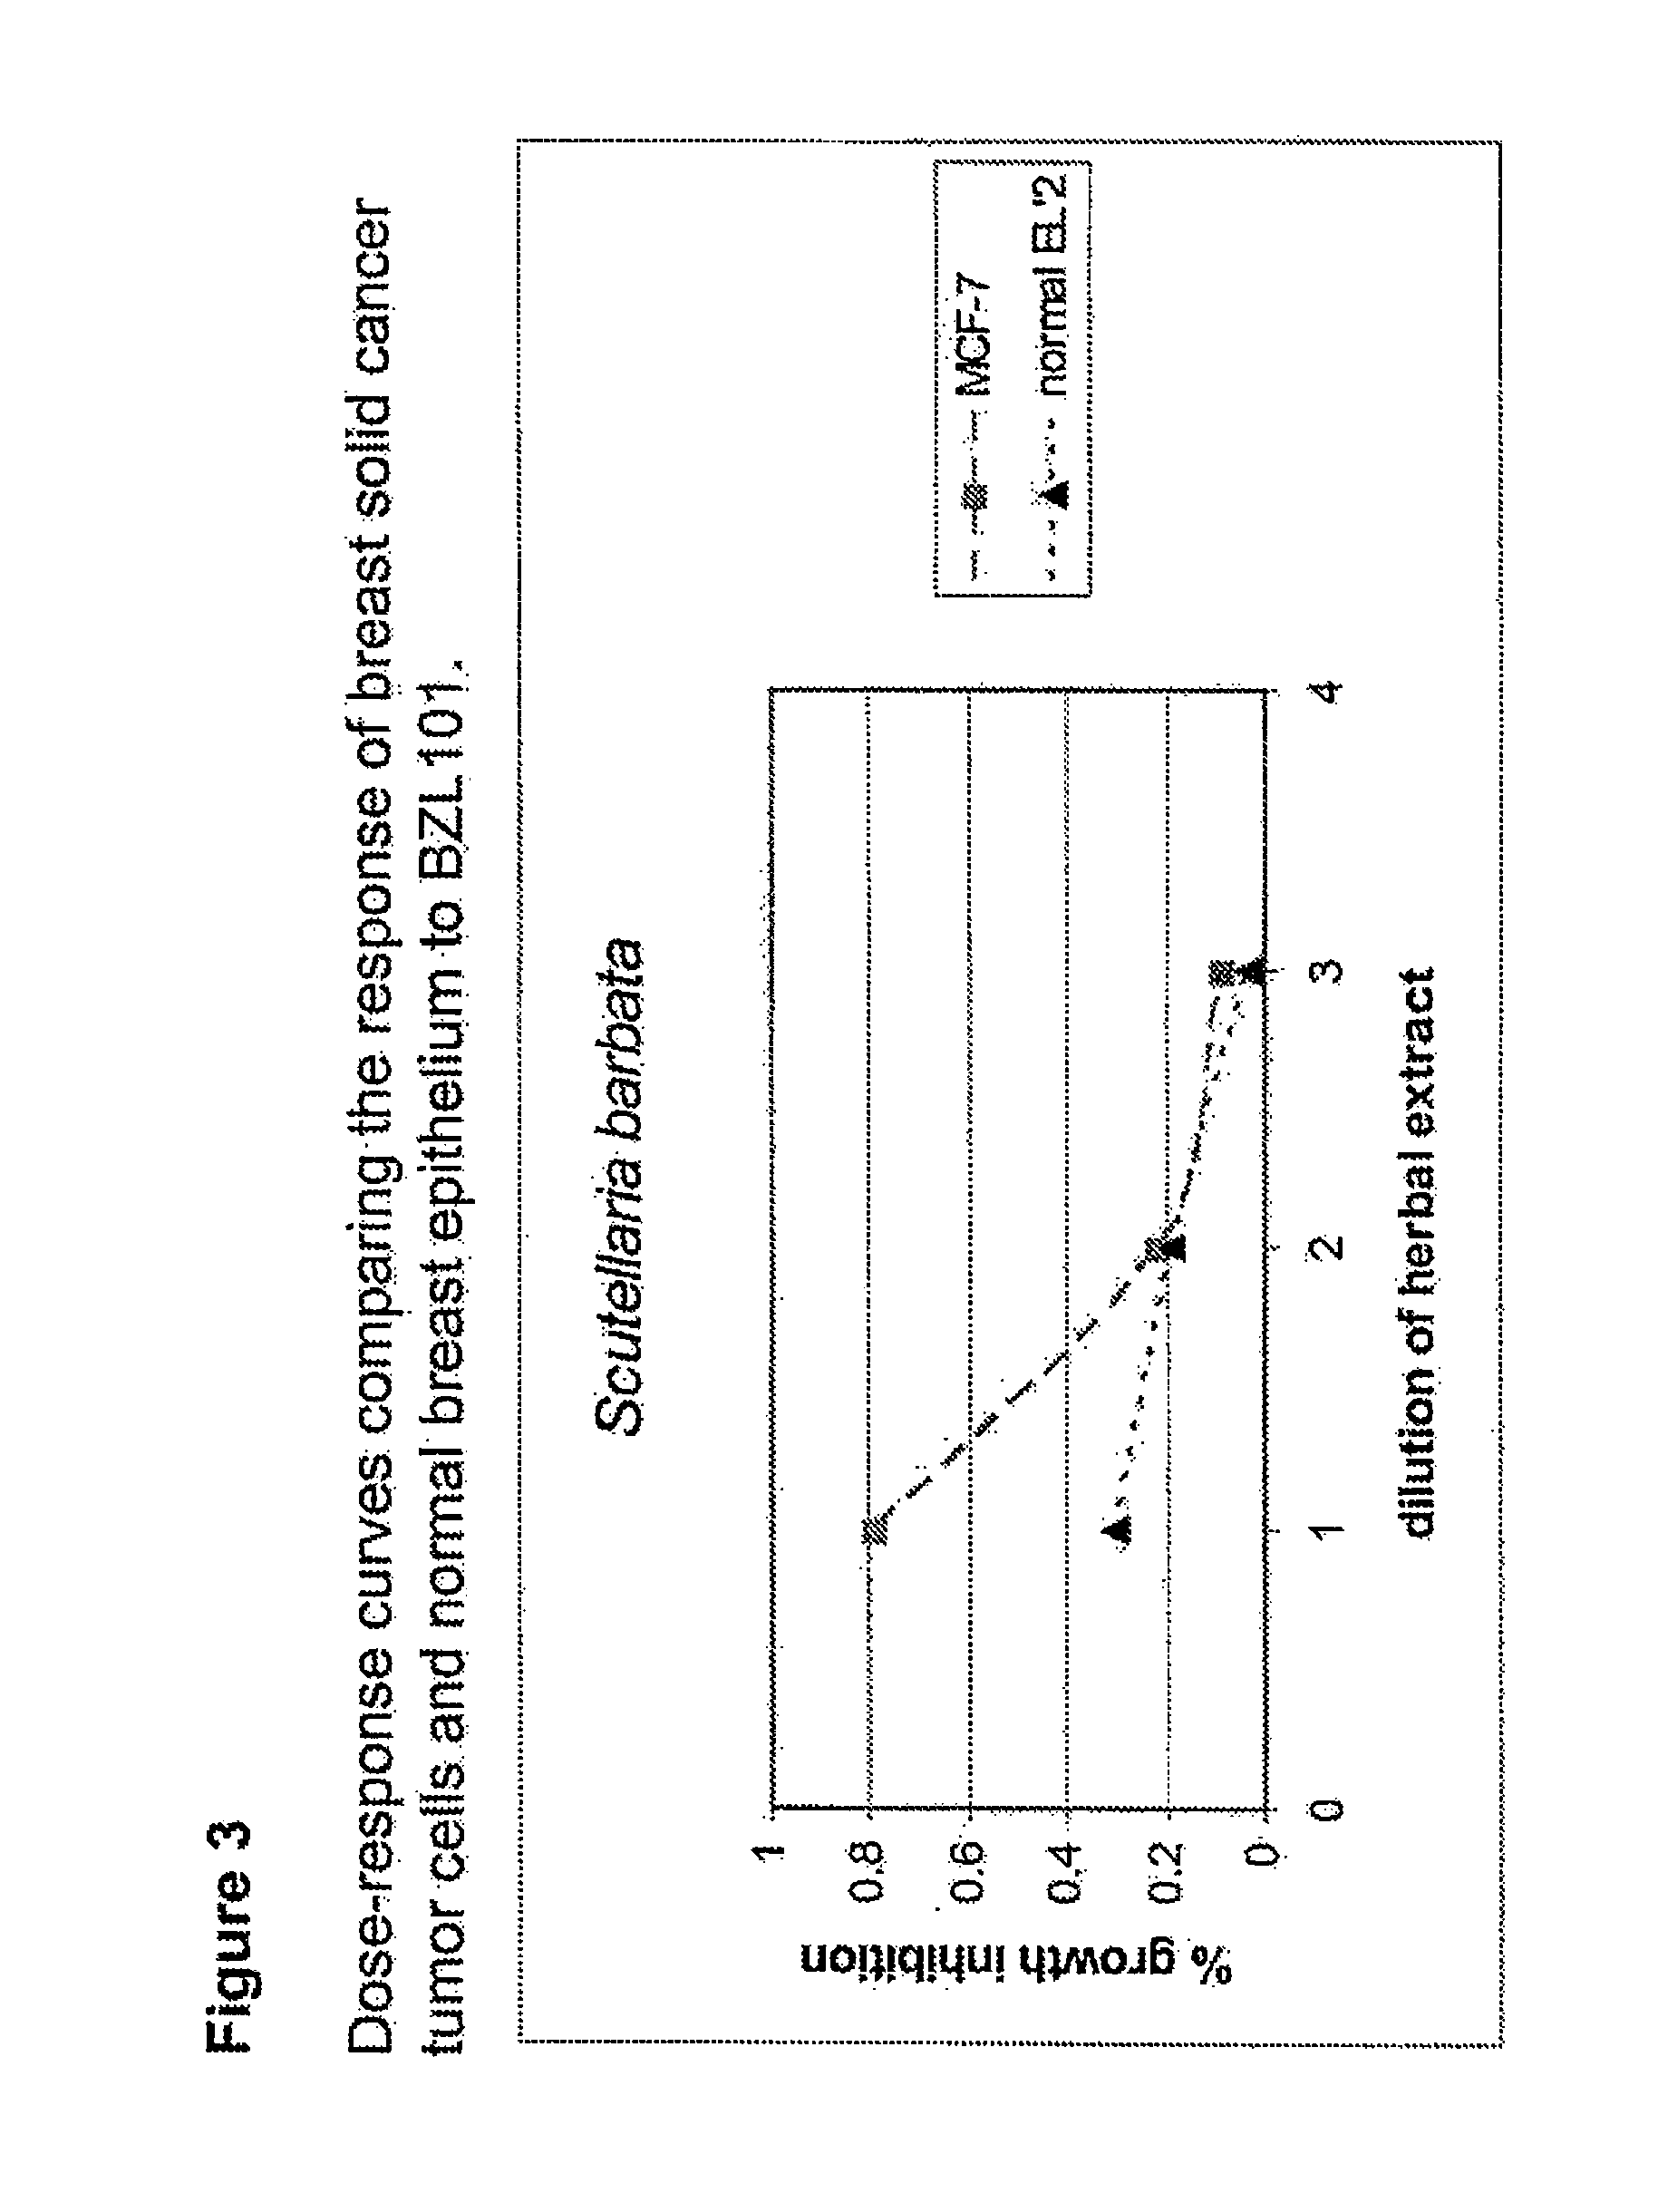 Methods of detecting and treatment of cancers using Scutellaria barbata extract